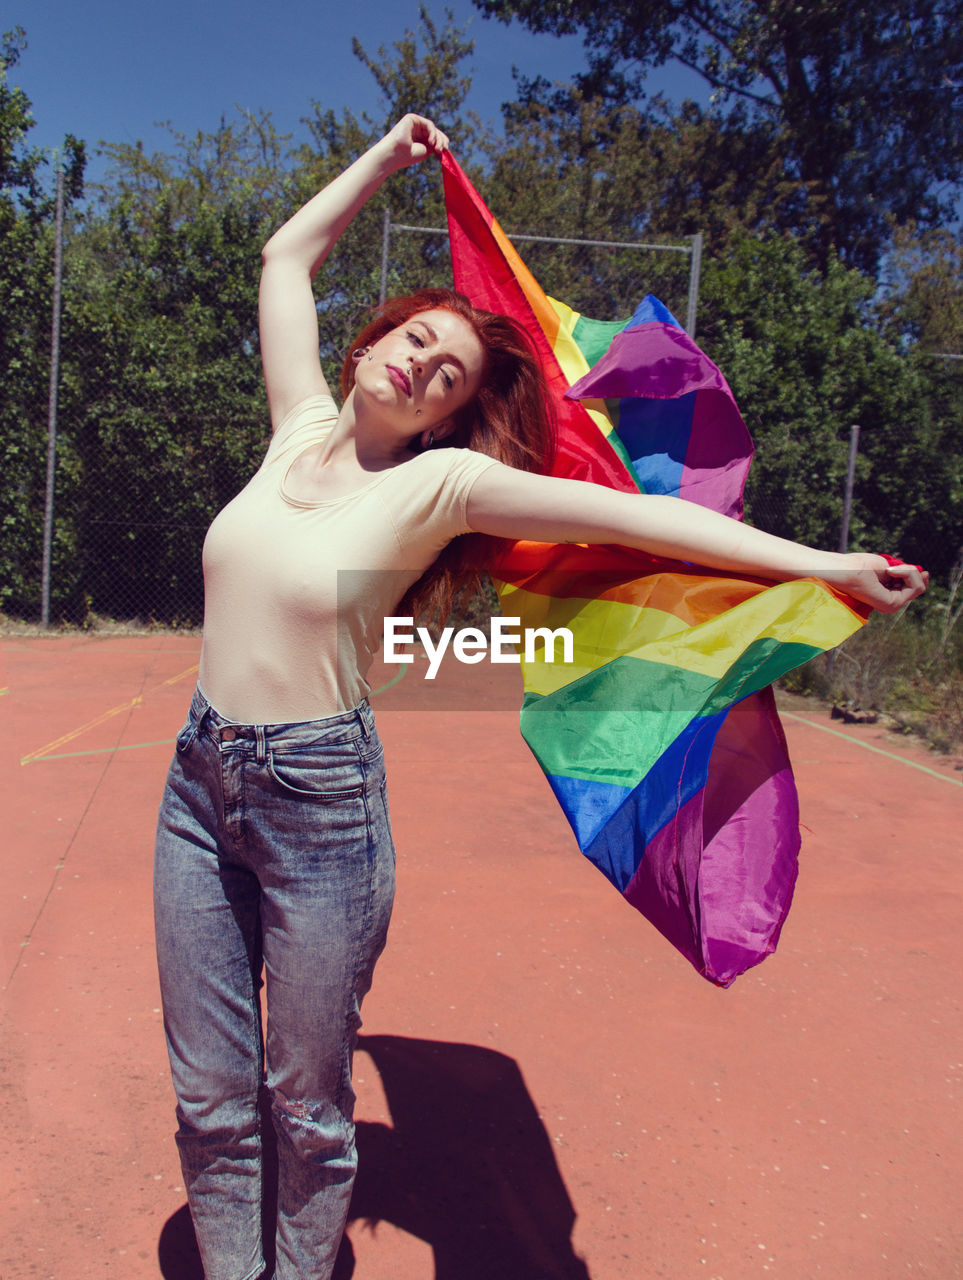 Young woman holding rainbow flag on basketball court against trees